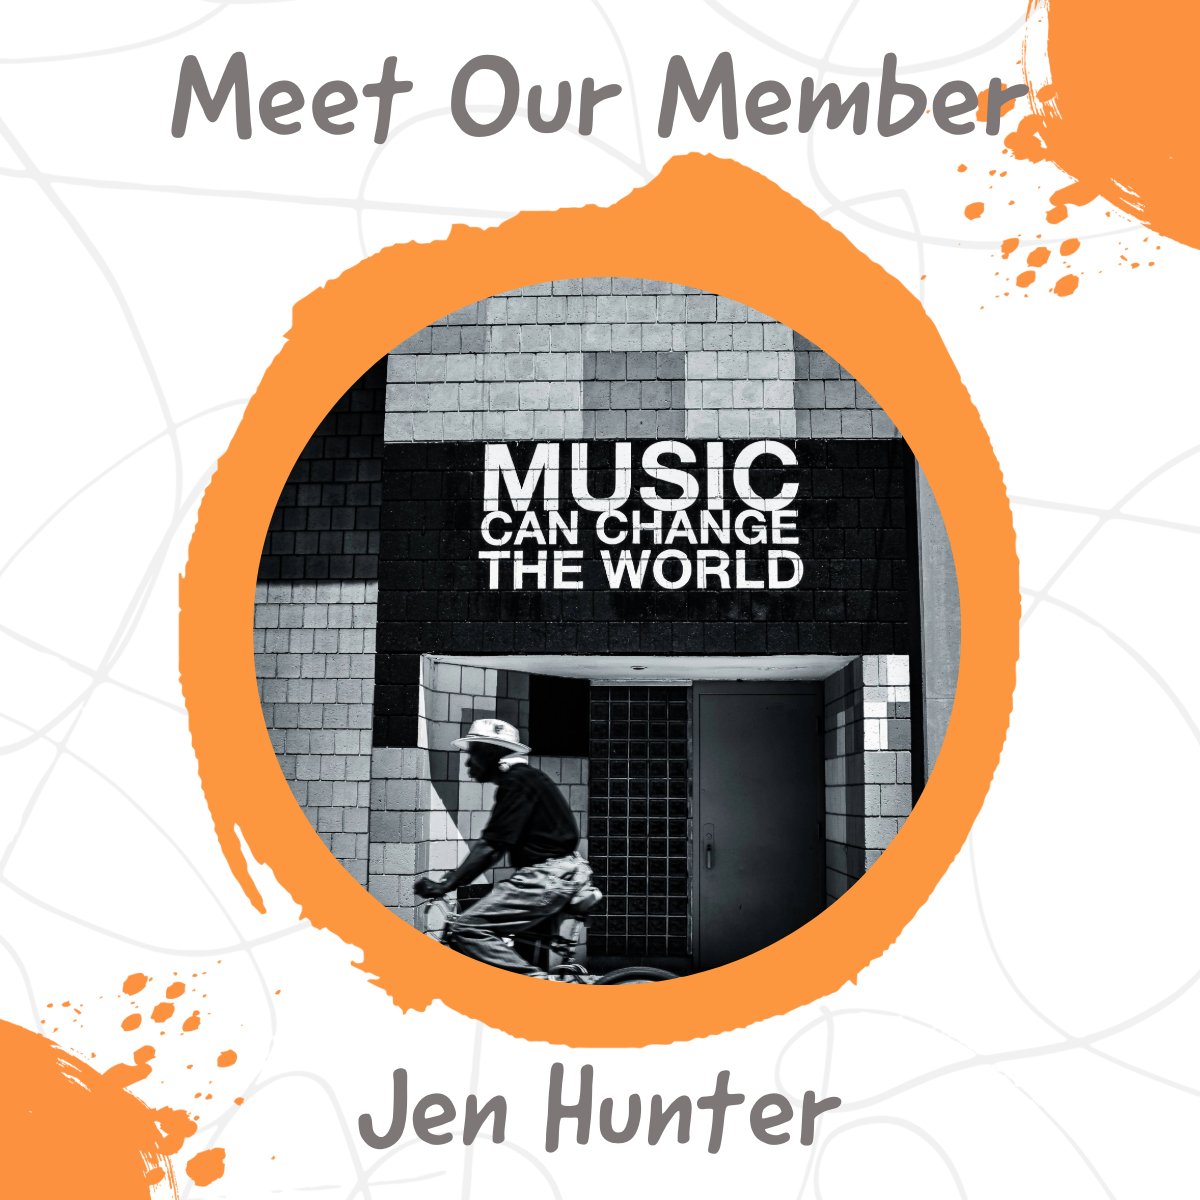 Meet our member, Jen Hunter! Take a moment to explore their work here - 
Vagabondstudioandgallery.com
instagram.com/vagabondstudio…
facebook.com/vagabondstudio…
 
 #Contemporary #ArtDiscovery #CreativeLife #ArtLovers #InvestInArt #FineArt